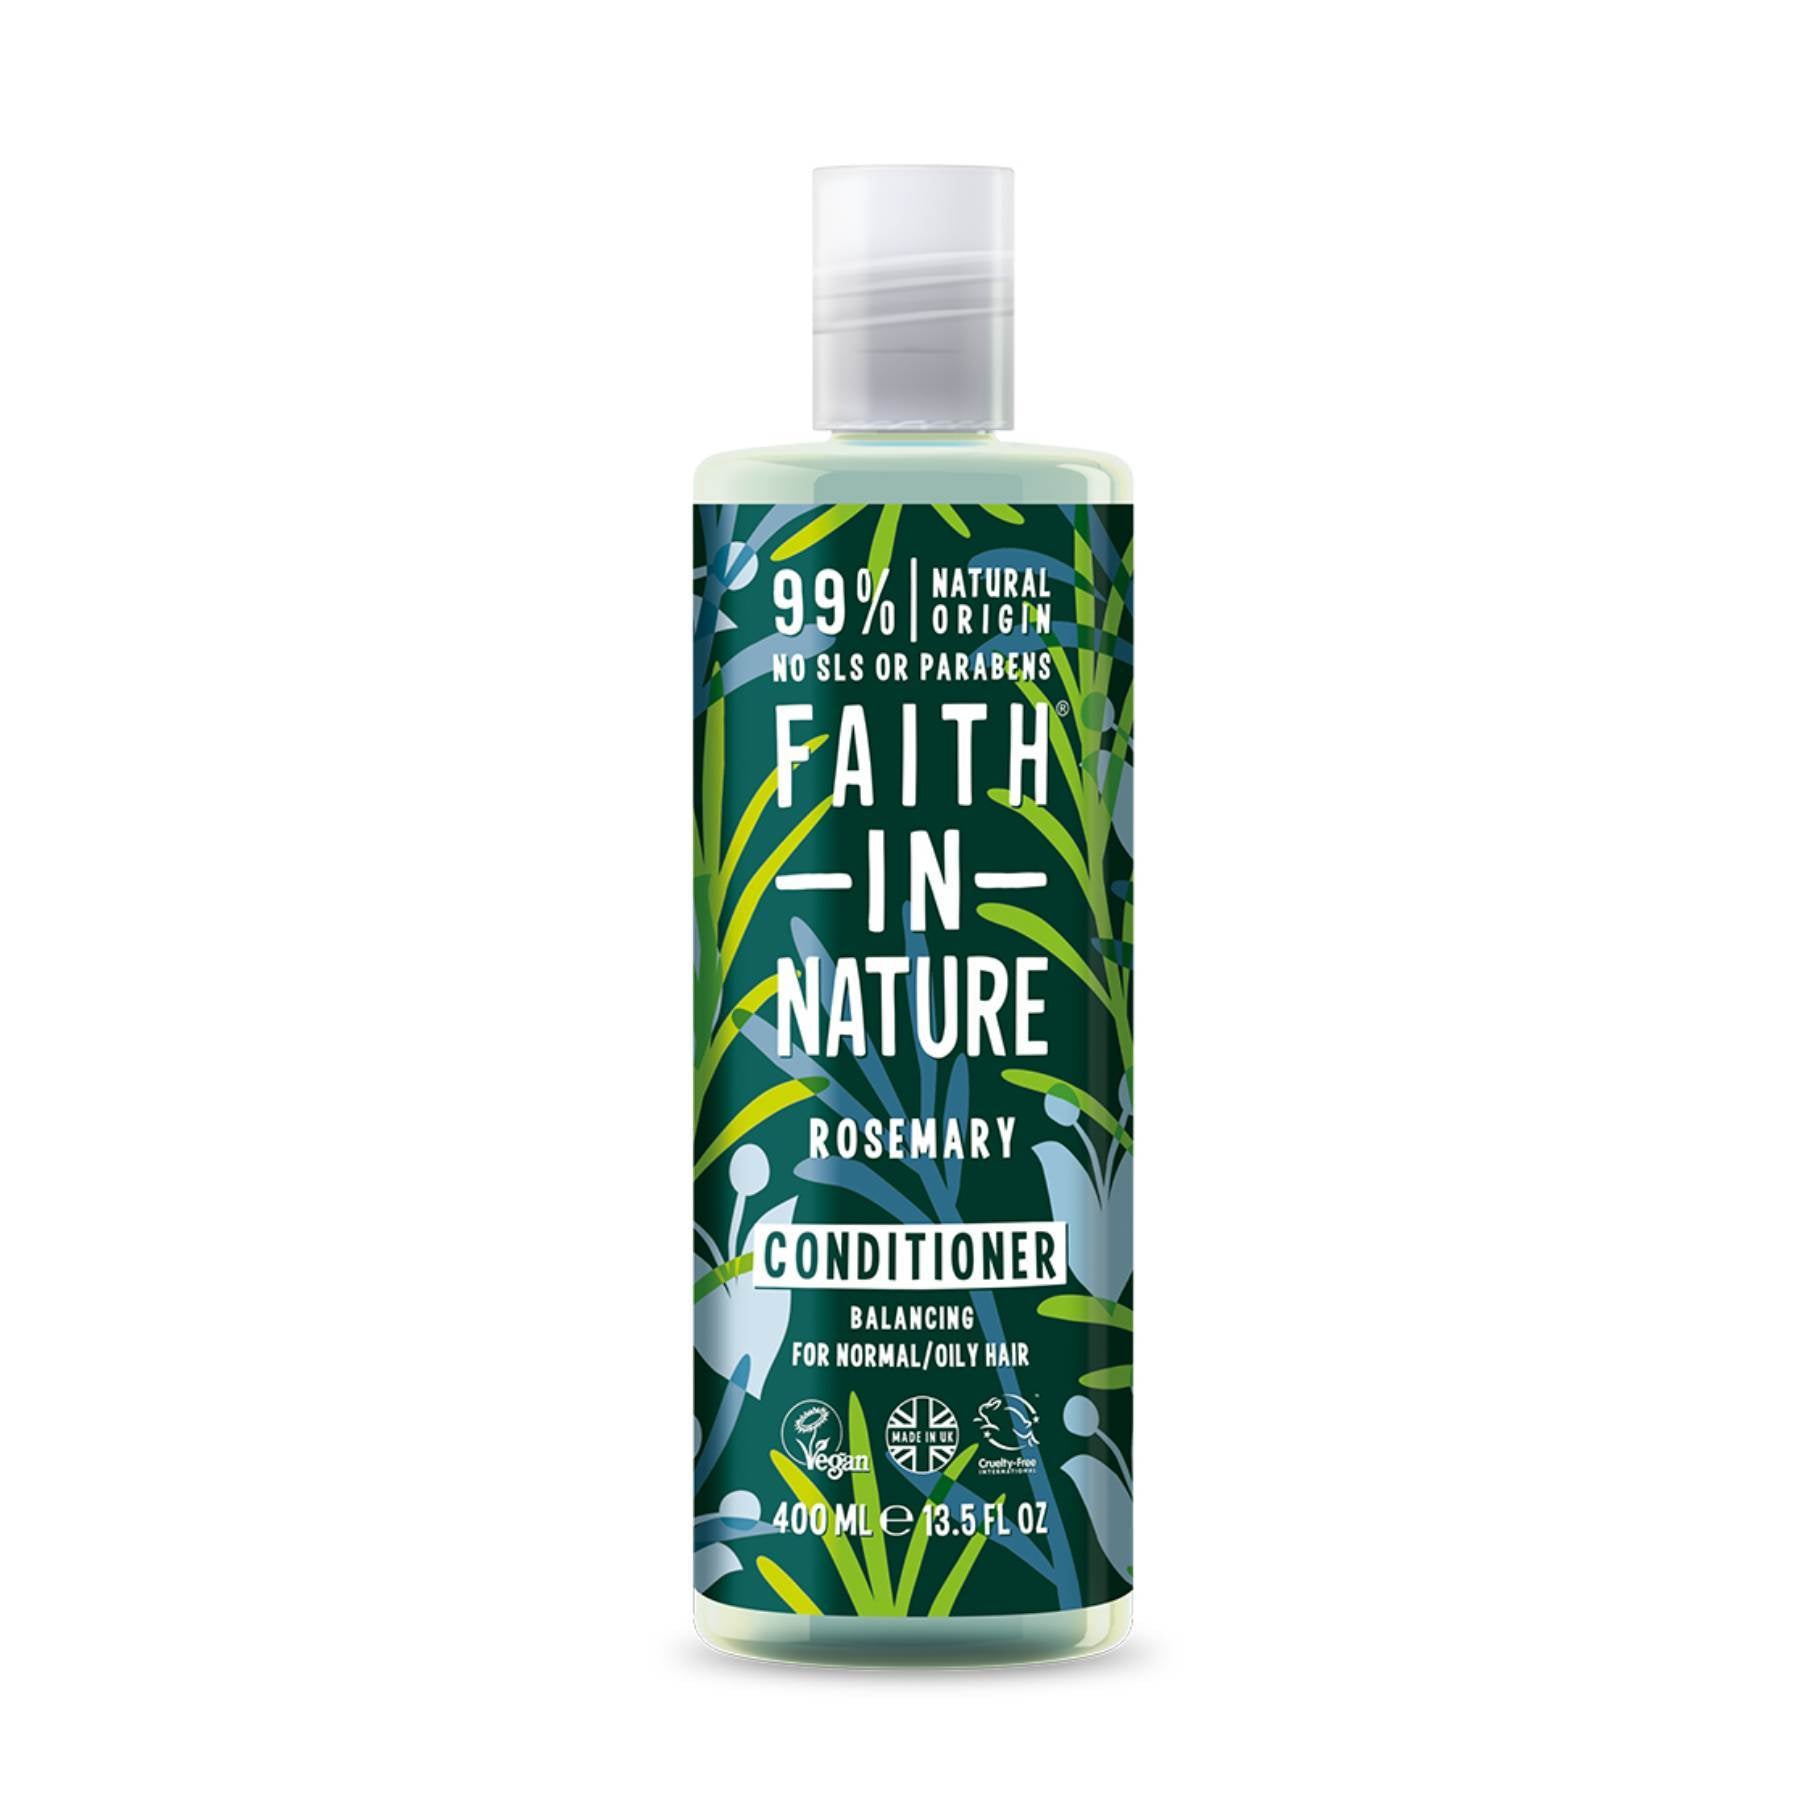  Shop Faith In Nature Rosemary Conditioner 400 ml | Volumizing on Sublime Life. Boosts Volume and Growth